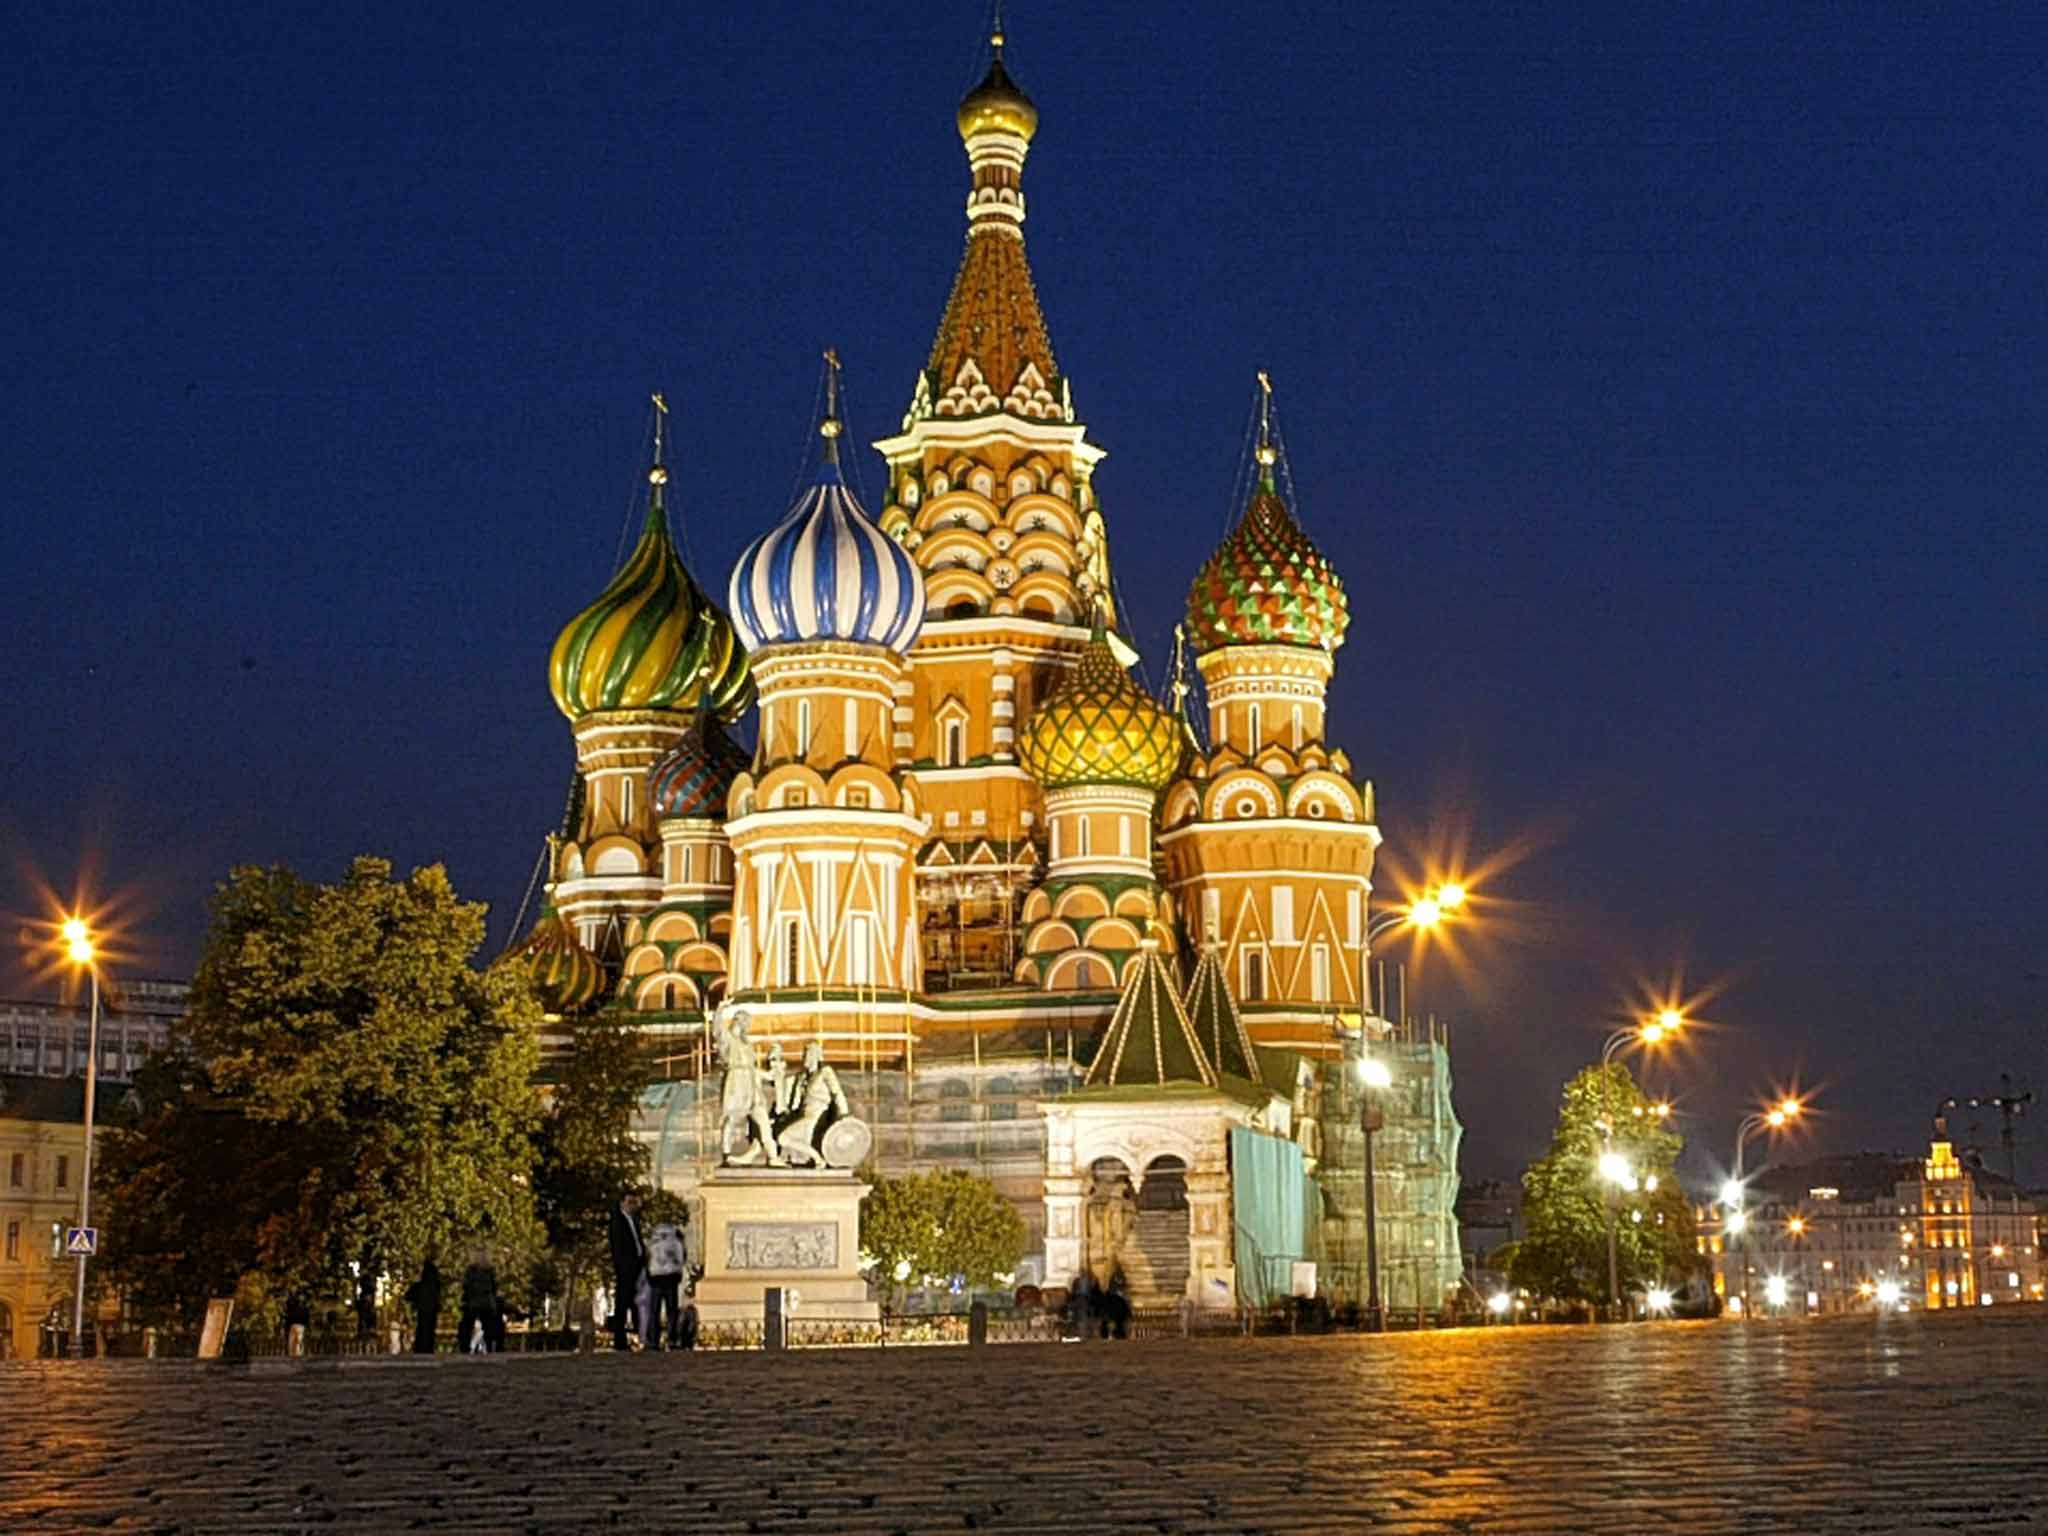 St Basil's Cathedral is at the heart of Moscow